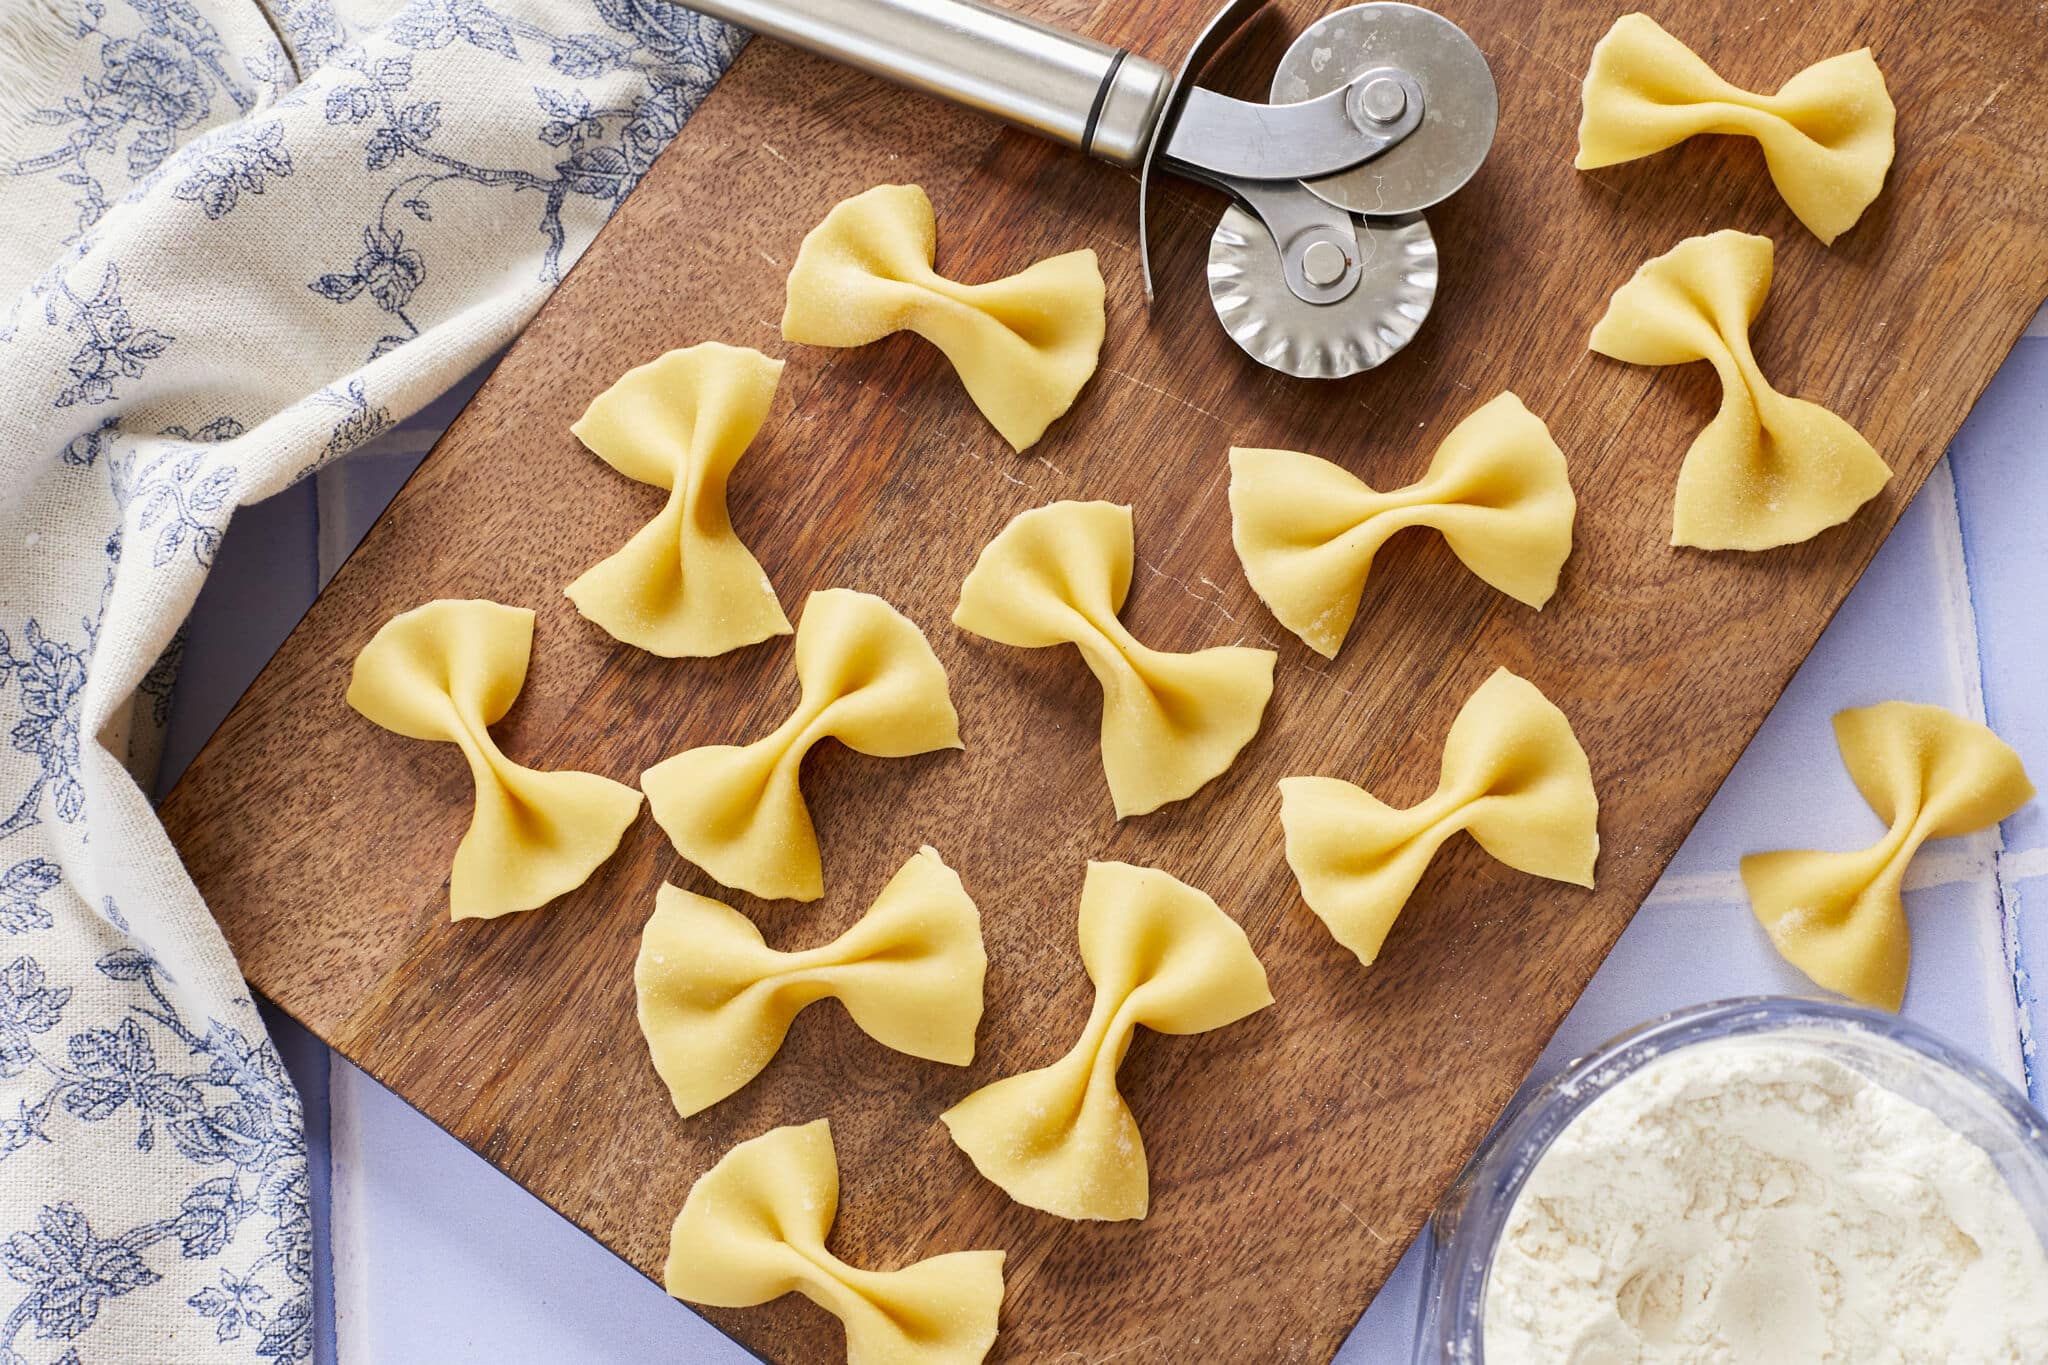 Butterfly-shaped Farfalle Pasta with perfect crevasses and fluted edges is drying on a wooden board with a fluted pasta cutter. A bowl of extra flour is on the side.